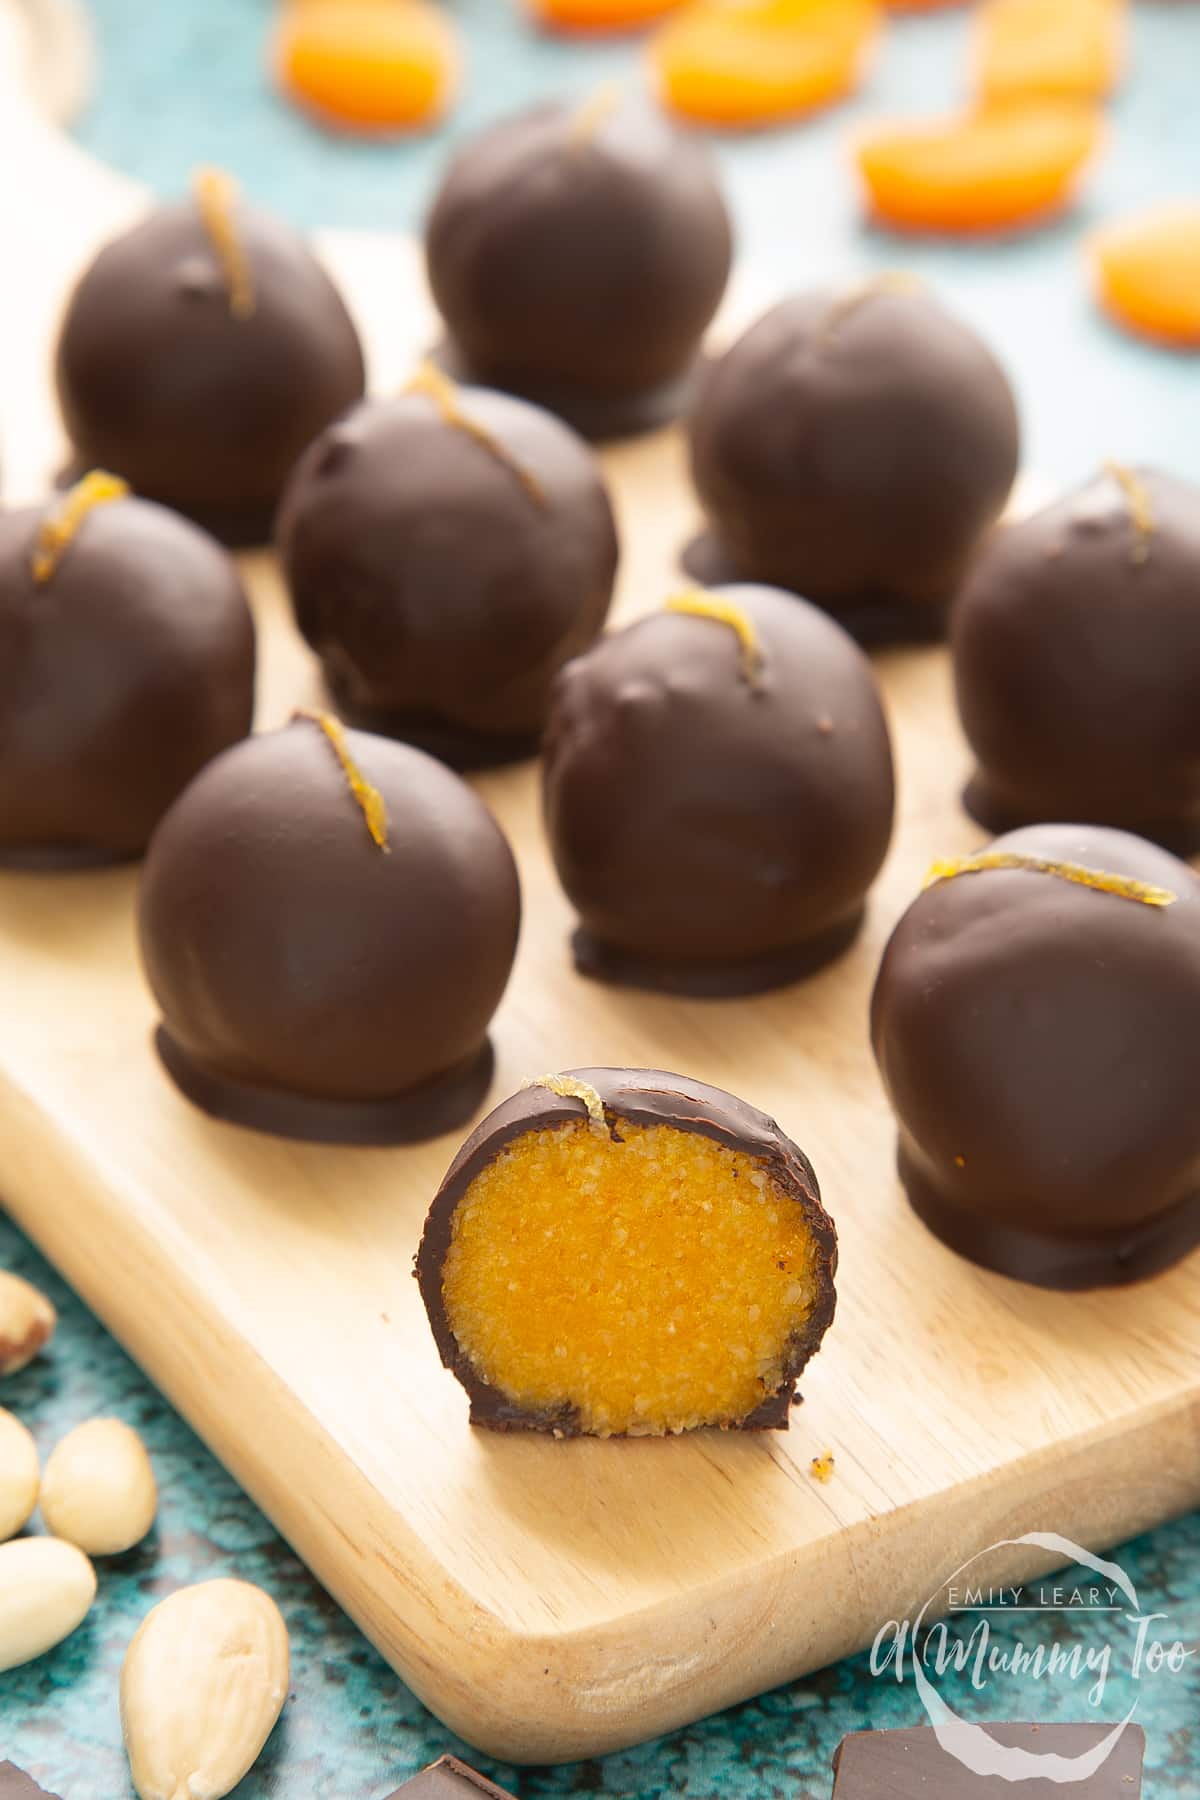 Chocolate apricot balls arranged on a wooden board. In the foreground sits half a ball, revealing the bright orange filling.